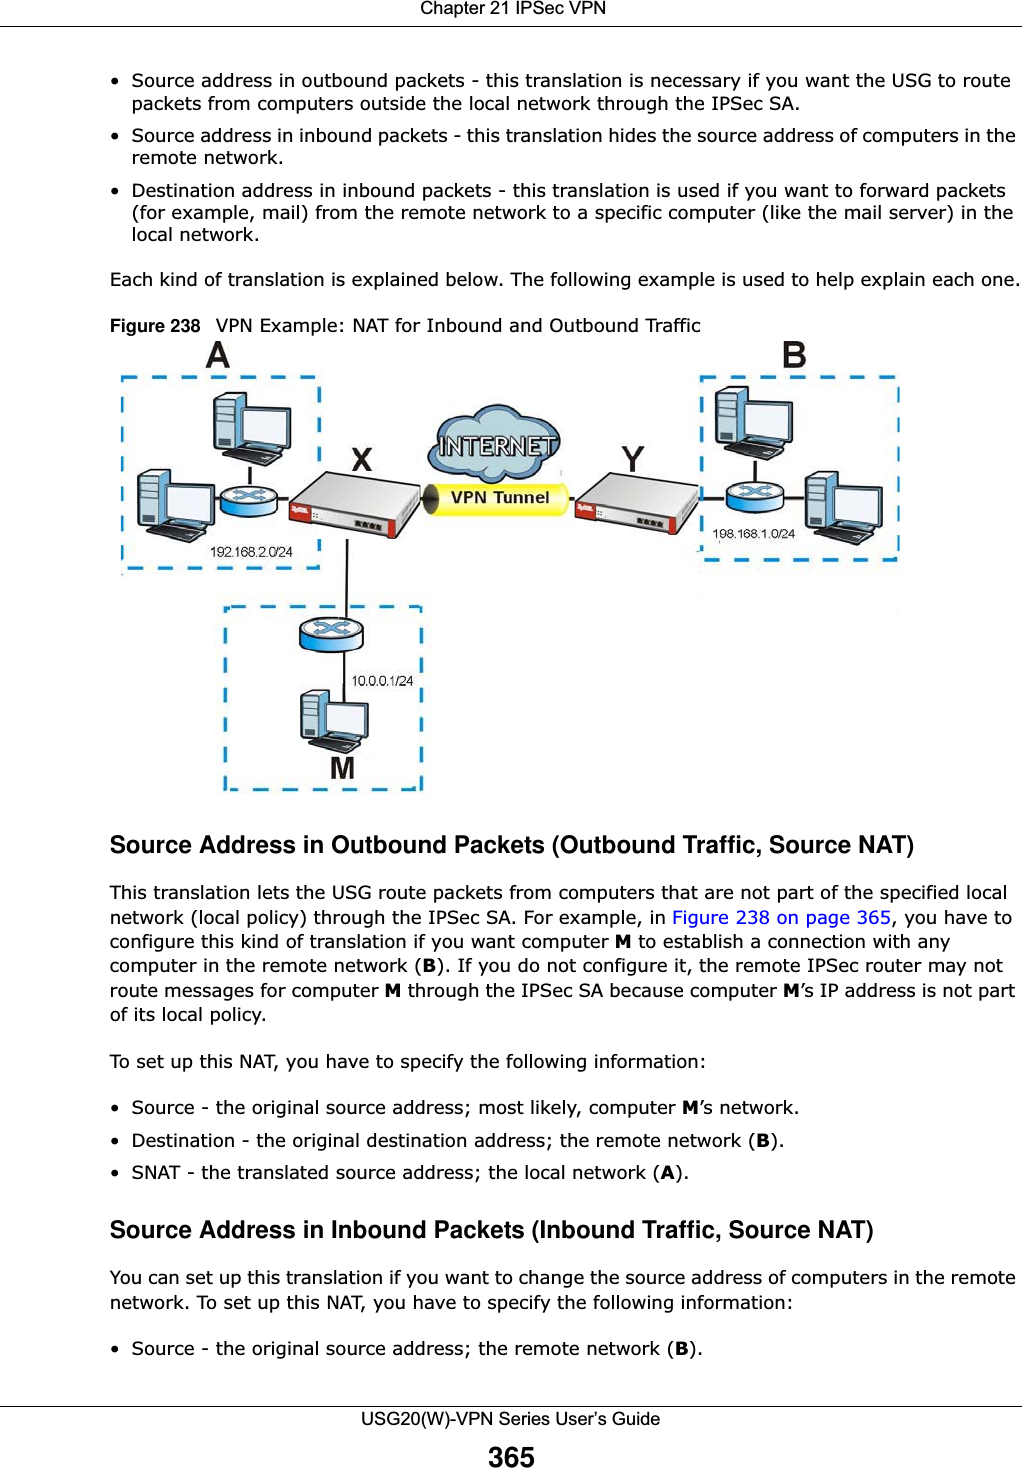  Chapter 21 IPSec VPNUSG20(W)-VPN Series User’s Guide365• Source address in outbound packets - this translation is necessary if you want the USG to route packets from computers outside the local network through the IPSec SA.• Source address in inbound packets - this translation hides the source address of computers in the remote network.• Destination address in inbound packets - this translation is used if you want to forward packets (for example, mail) from the remote network to a specific computer (like the mail server) in the local network.Each kind of translation is explained below. The following example is used to help explain each one.Figure 238   VPN Example: NAT for Inbound and Outbound TrafficSource Address in Outbound Packets (Outbound Traffic, Source NAT)This translation lets the USG route packets from computers that are not part of the specified local network (local policy) through the IPSec SA. For example, in Figure 238 on page 365, you have to configure this kind of translation if you want computer M to establish a connection with any computer in the remote network (B). If you do not configure it, the remote IPSec router may not route messages for computer M through the IPSec SA because computer M’s IP address is not part of its local policy.To set up this NAT, you have to specify the following information:• Source - the original source address; most likely, computer M’s network.• Destination - the original destination address; the remote network (B).• SNAT - the translated source address; the local network (A).Source Address in Inbound Packets (Inbound Traffic, Source NAT)You can set up this translation if you want to change the source address of computers in the remote network. To set up this NAT, you have to specify the following information:• Source - the original source address; the remote network (B).